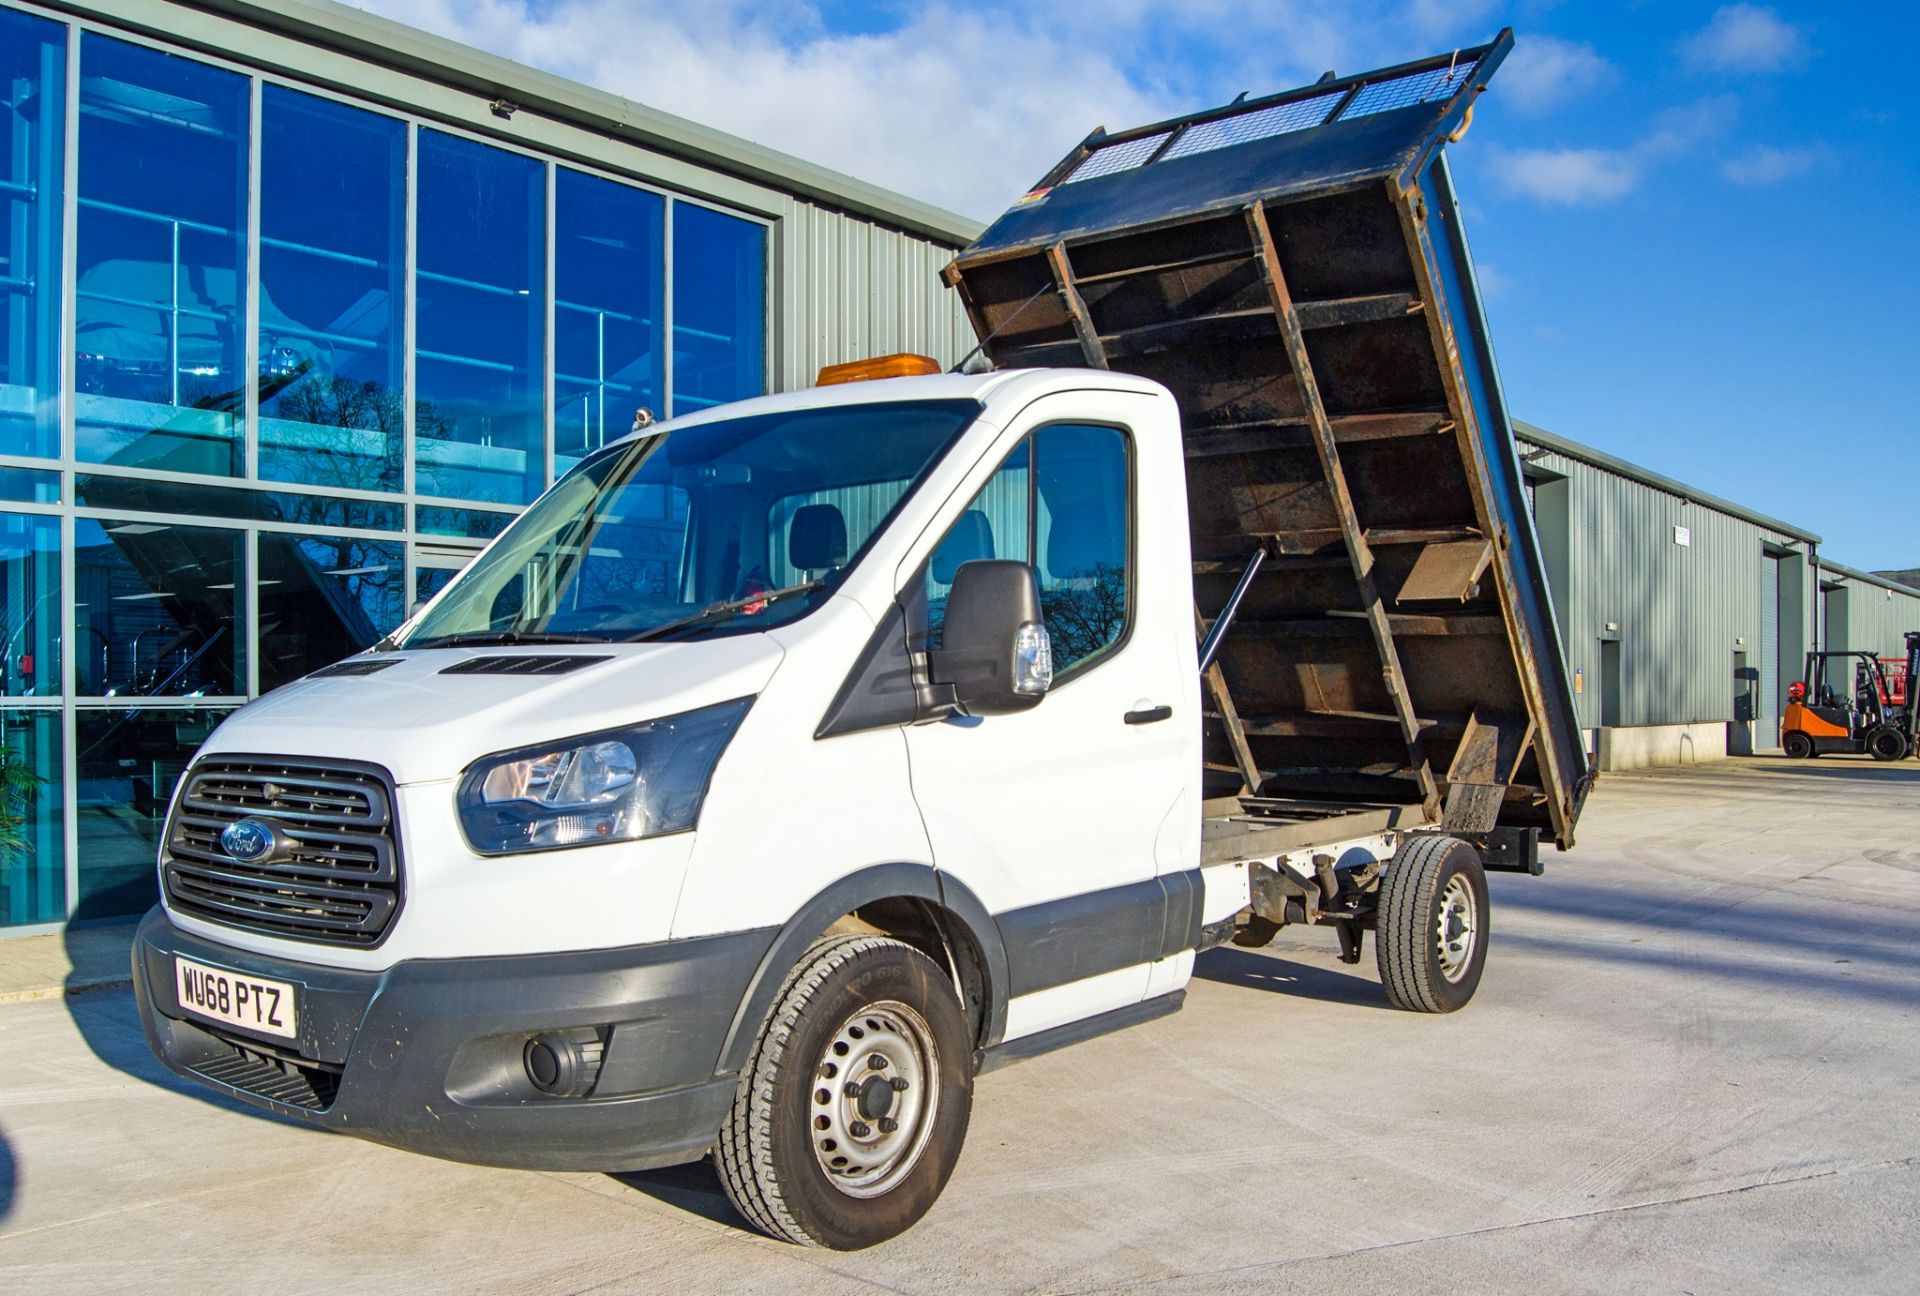 Ford Transit 350 Euro 6 2 litre diesel 6 speed manual tipper Registration Number: WU68 PTZ Date of - Image 17 of 37